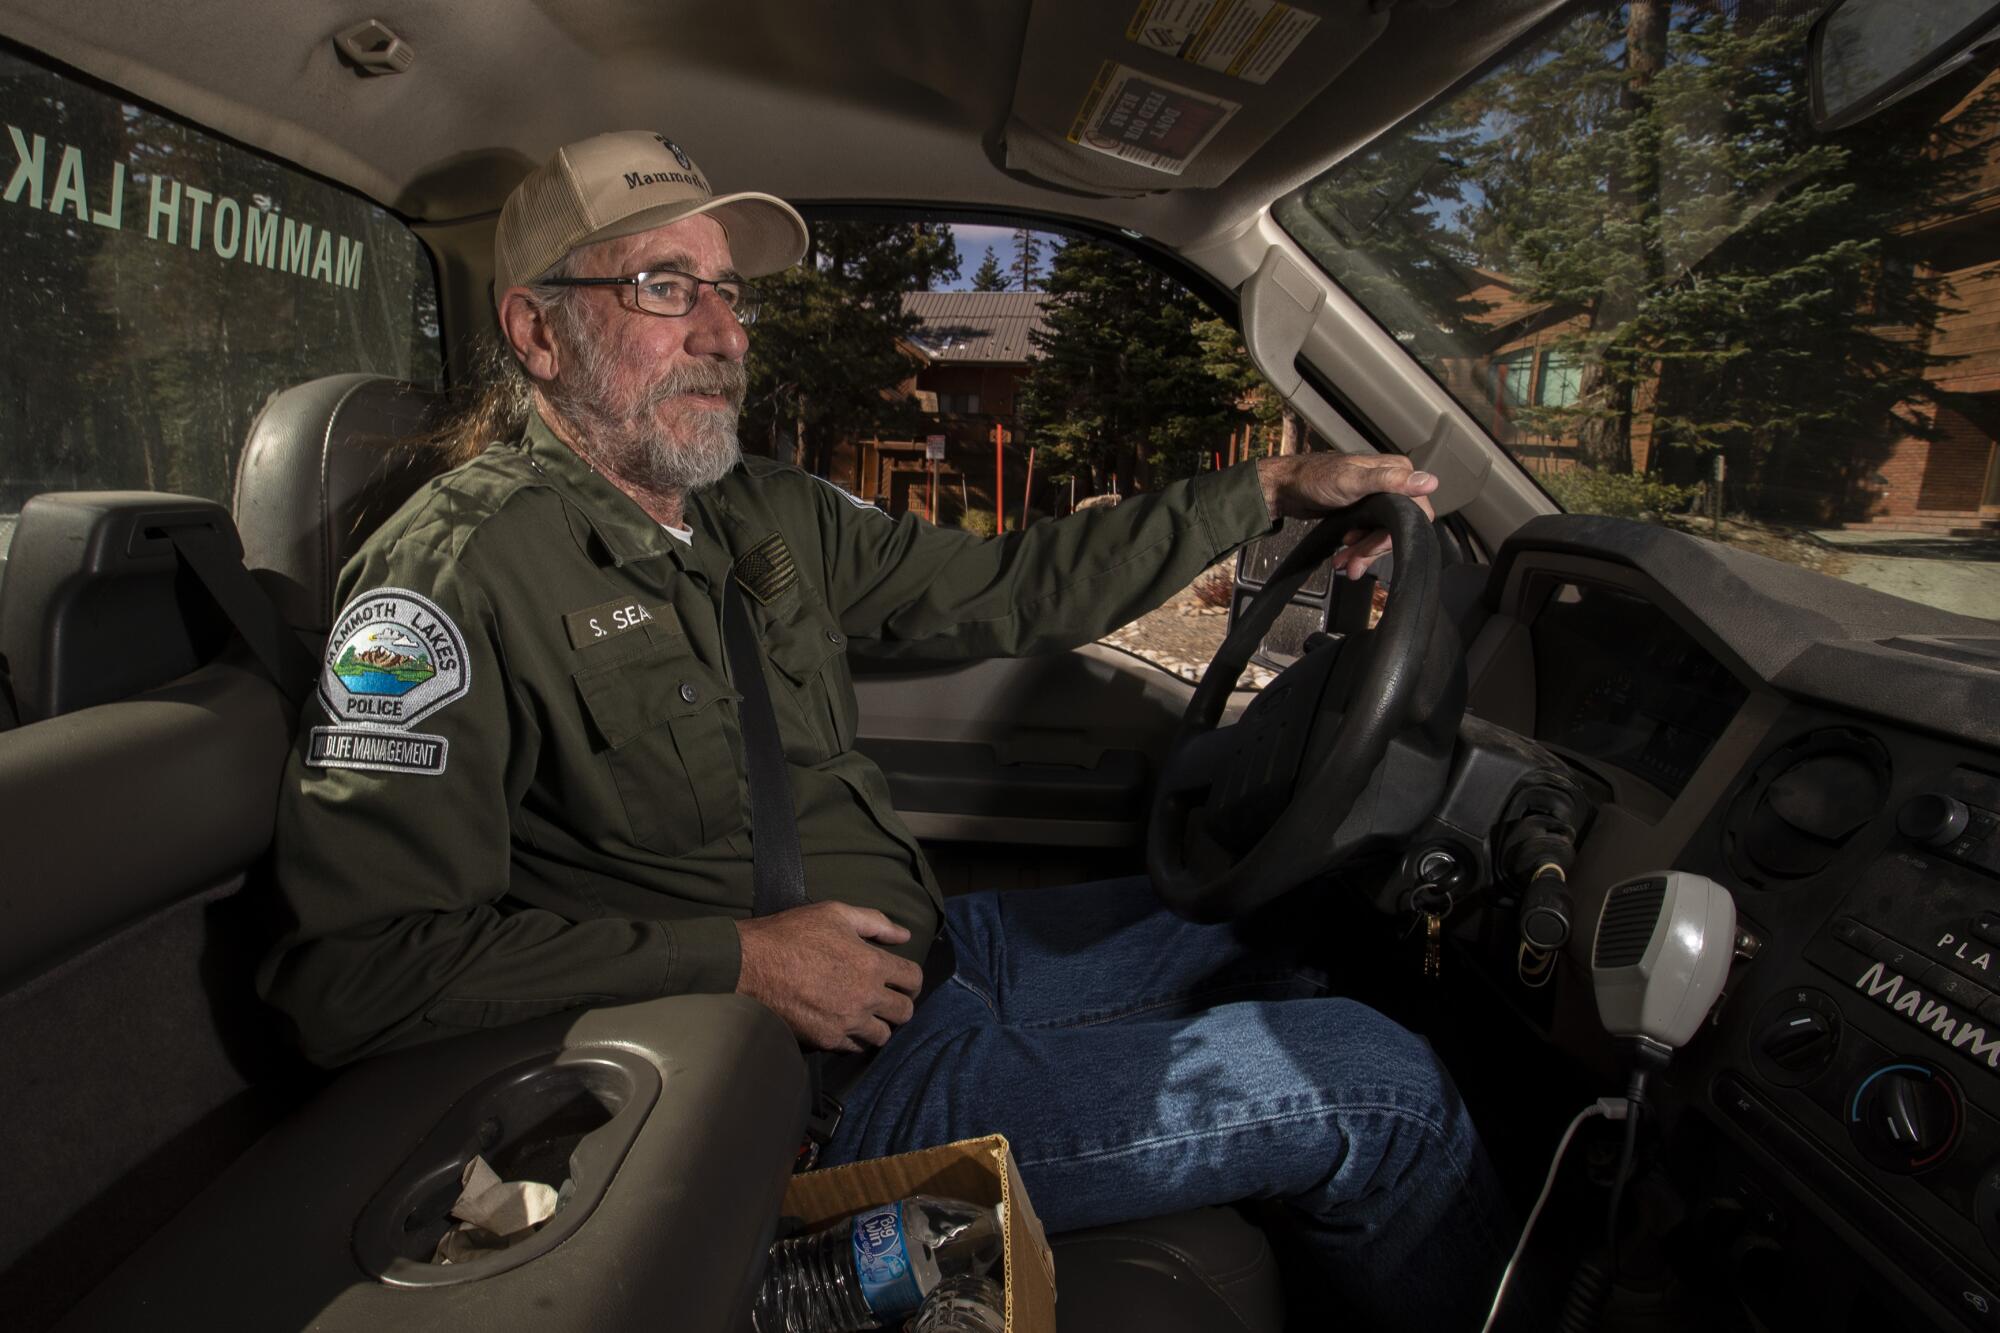 A bearded man in a cap and ranger jacket sitting in a truck.